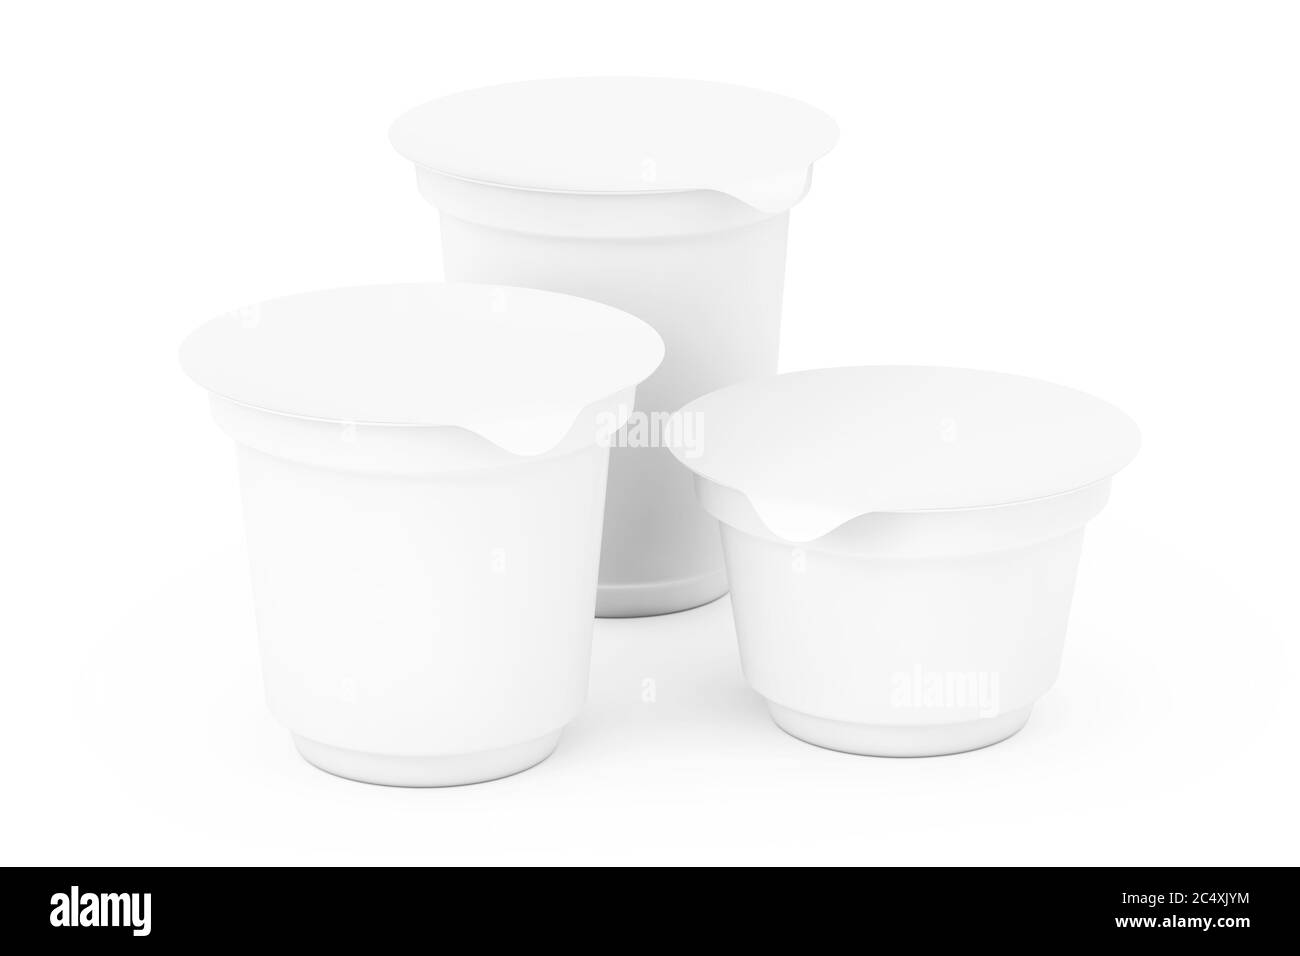 https://c8.alamy.com/comp/2C4XJYM/blank-white-packaging-containers-for-yogurt-ice-cream-or-dessert-on-a-white-background-3d-rendering-2C4XJYM.jpg